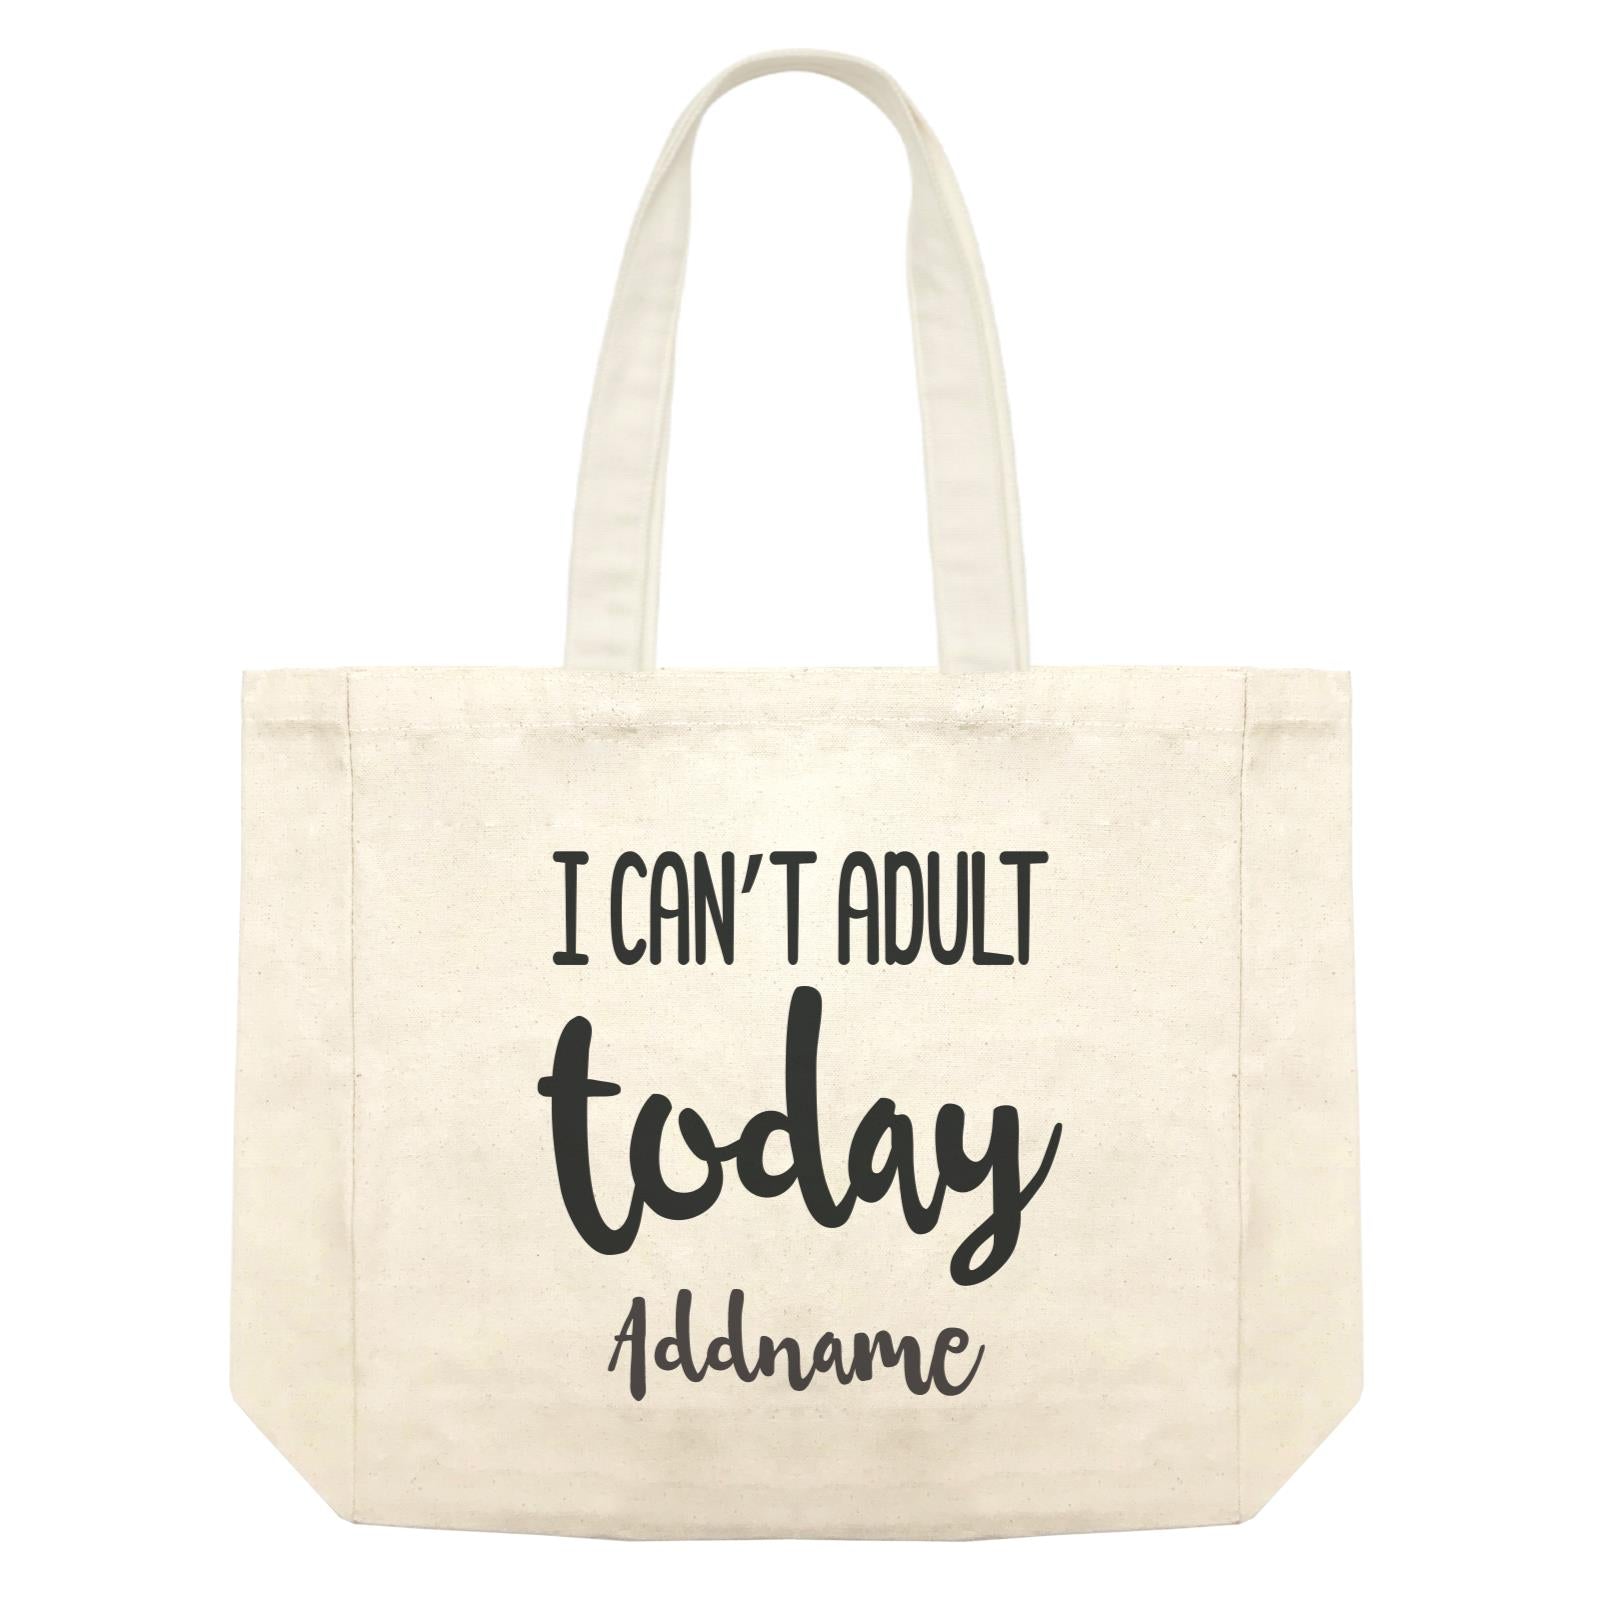 Random Quotes I can't Adult Today Addname Shopping Bag